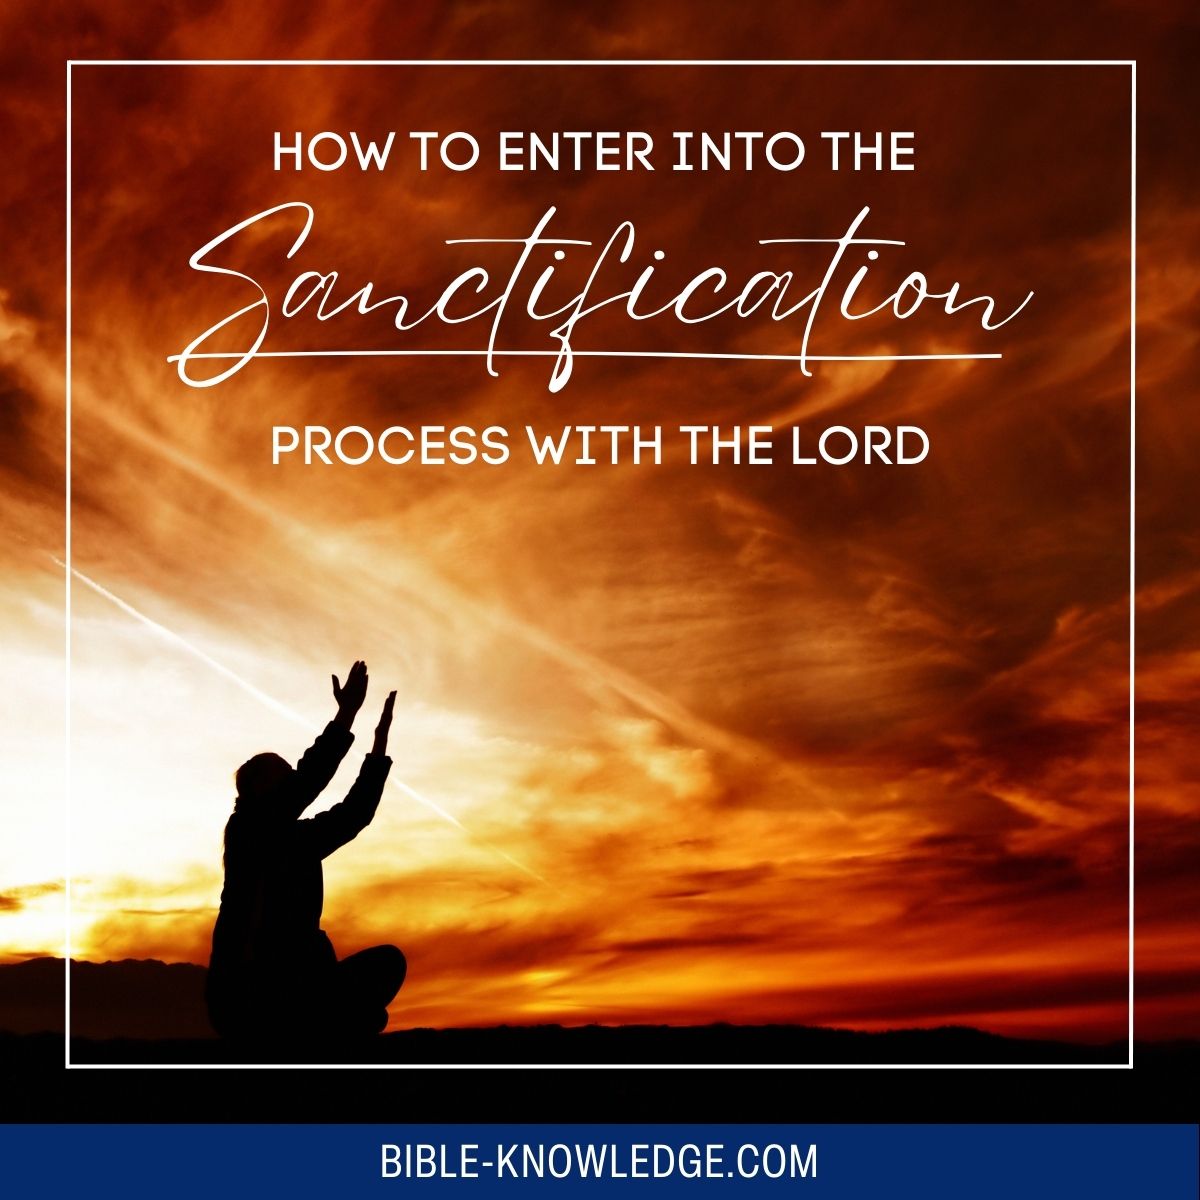 How to Enter Into the Sanctification Process with the Lord